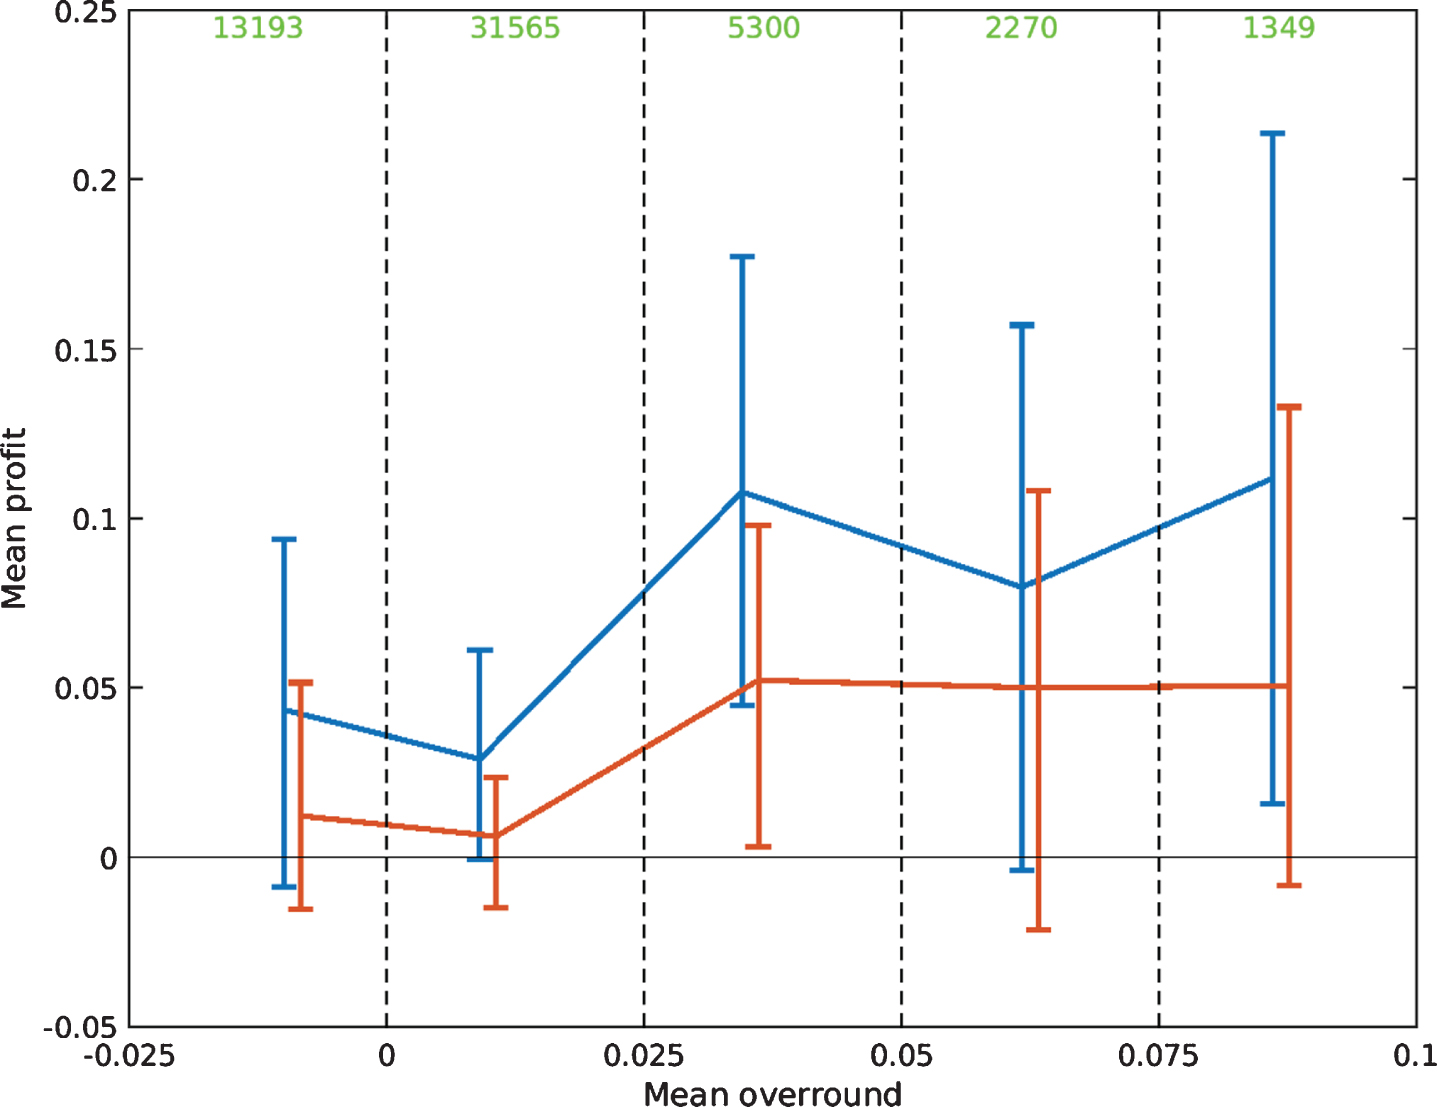 Mean overround against mean profit under the Kelly strategy (blue) and the Level Stakes strategy (red) for each considered interval. The error bars represent 95 percent bootstrap resampling intervals of the mean.